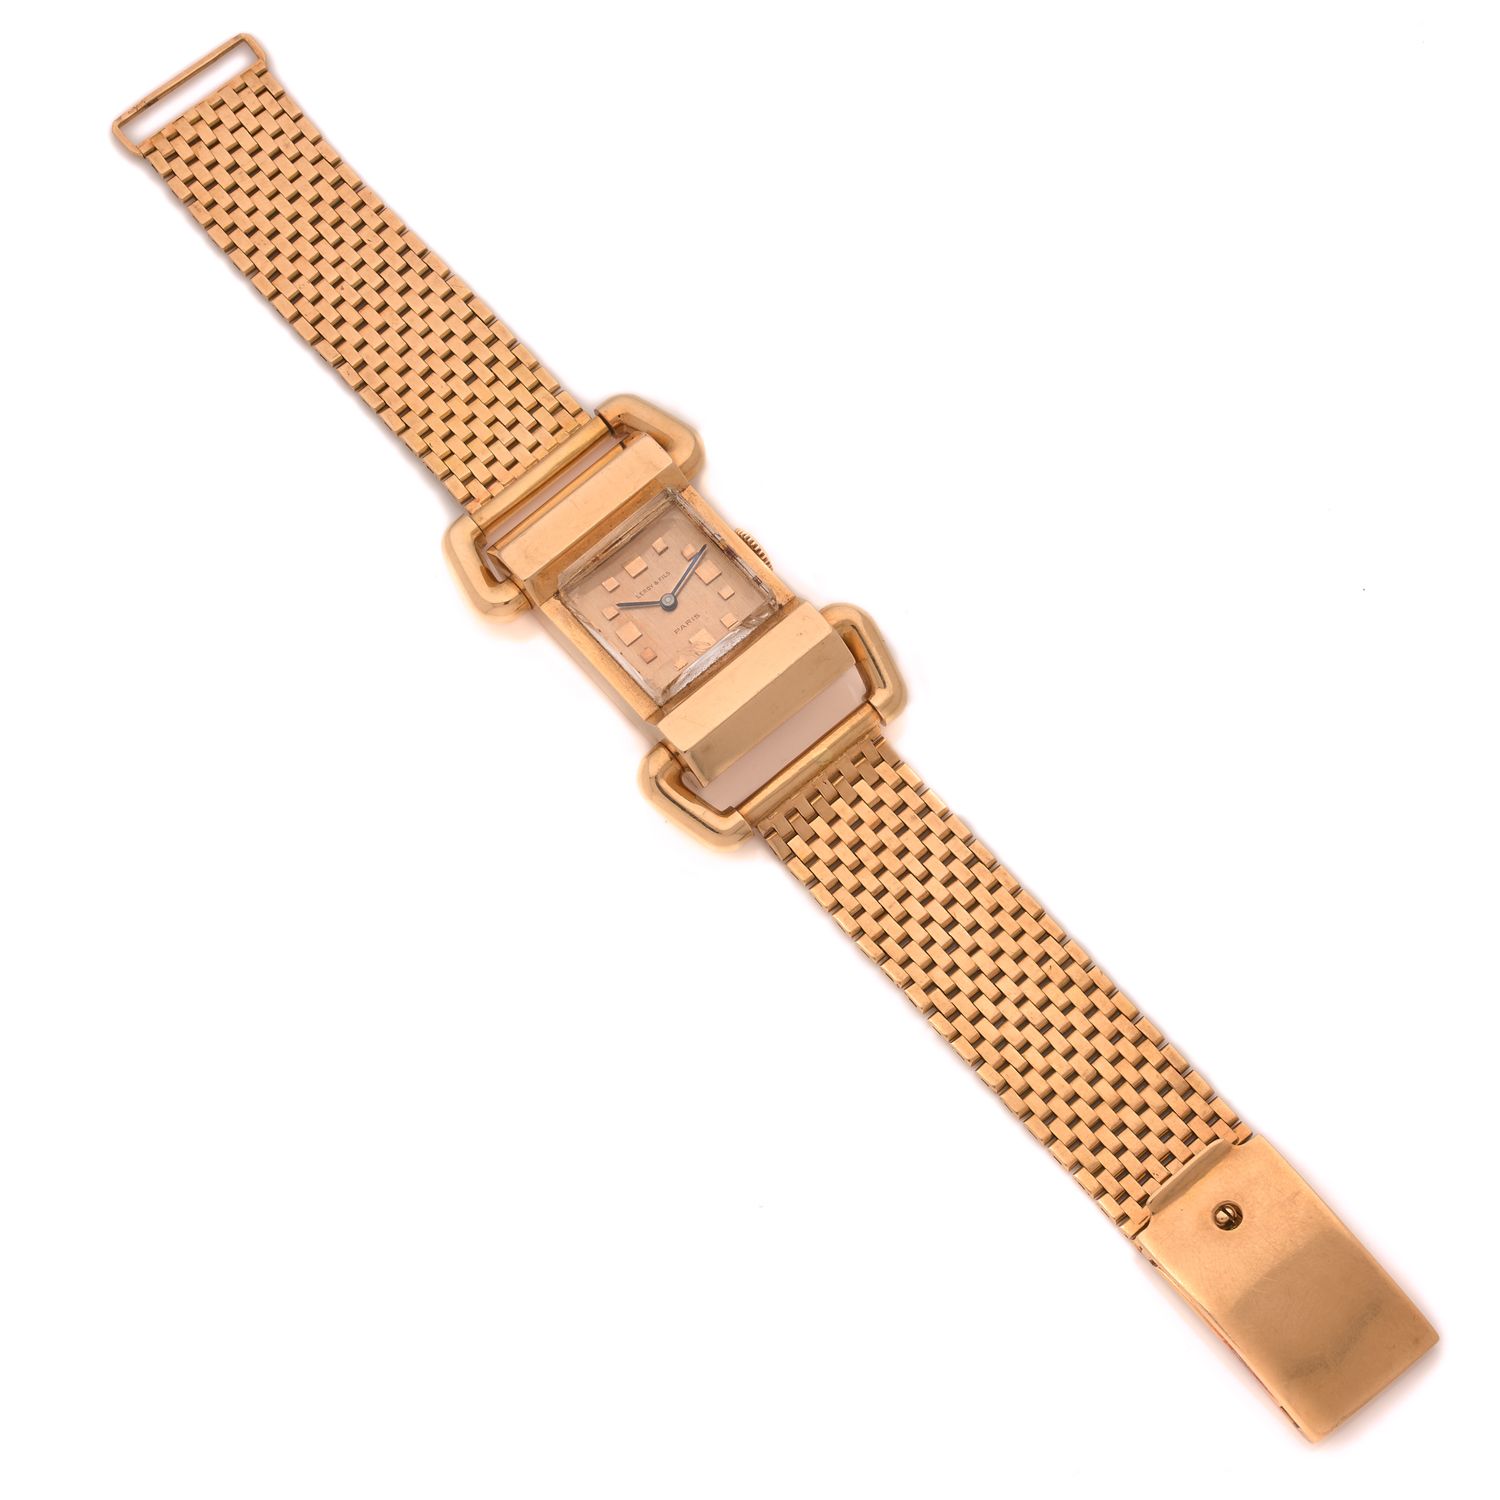 Null LEROY & FILS

YEARS 40

Yellow gold bracelet watch

CASE: rectangular with &hellip;